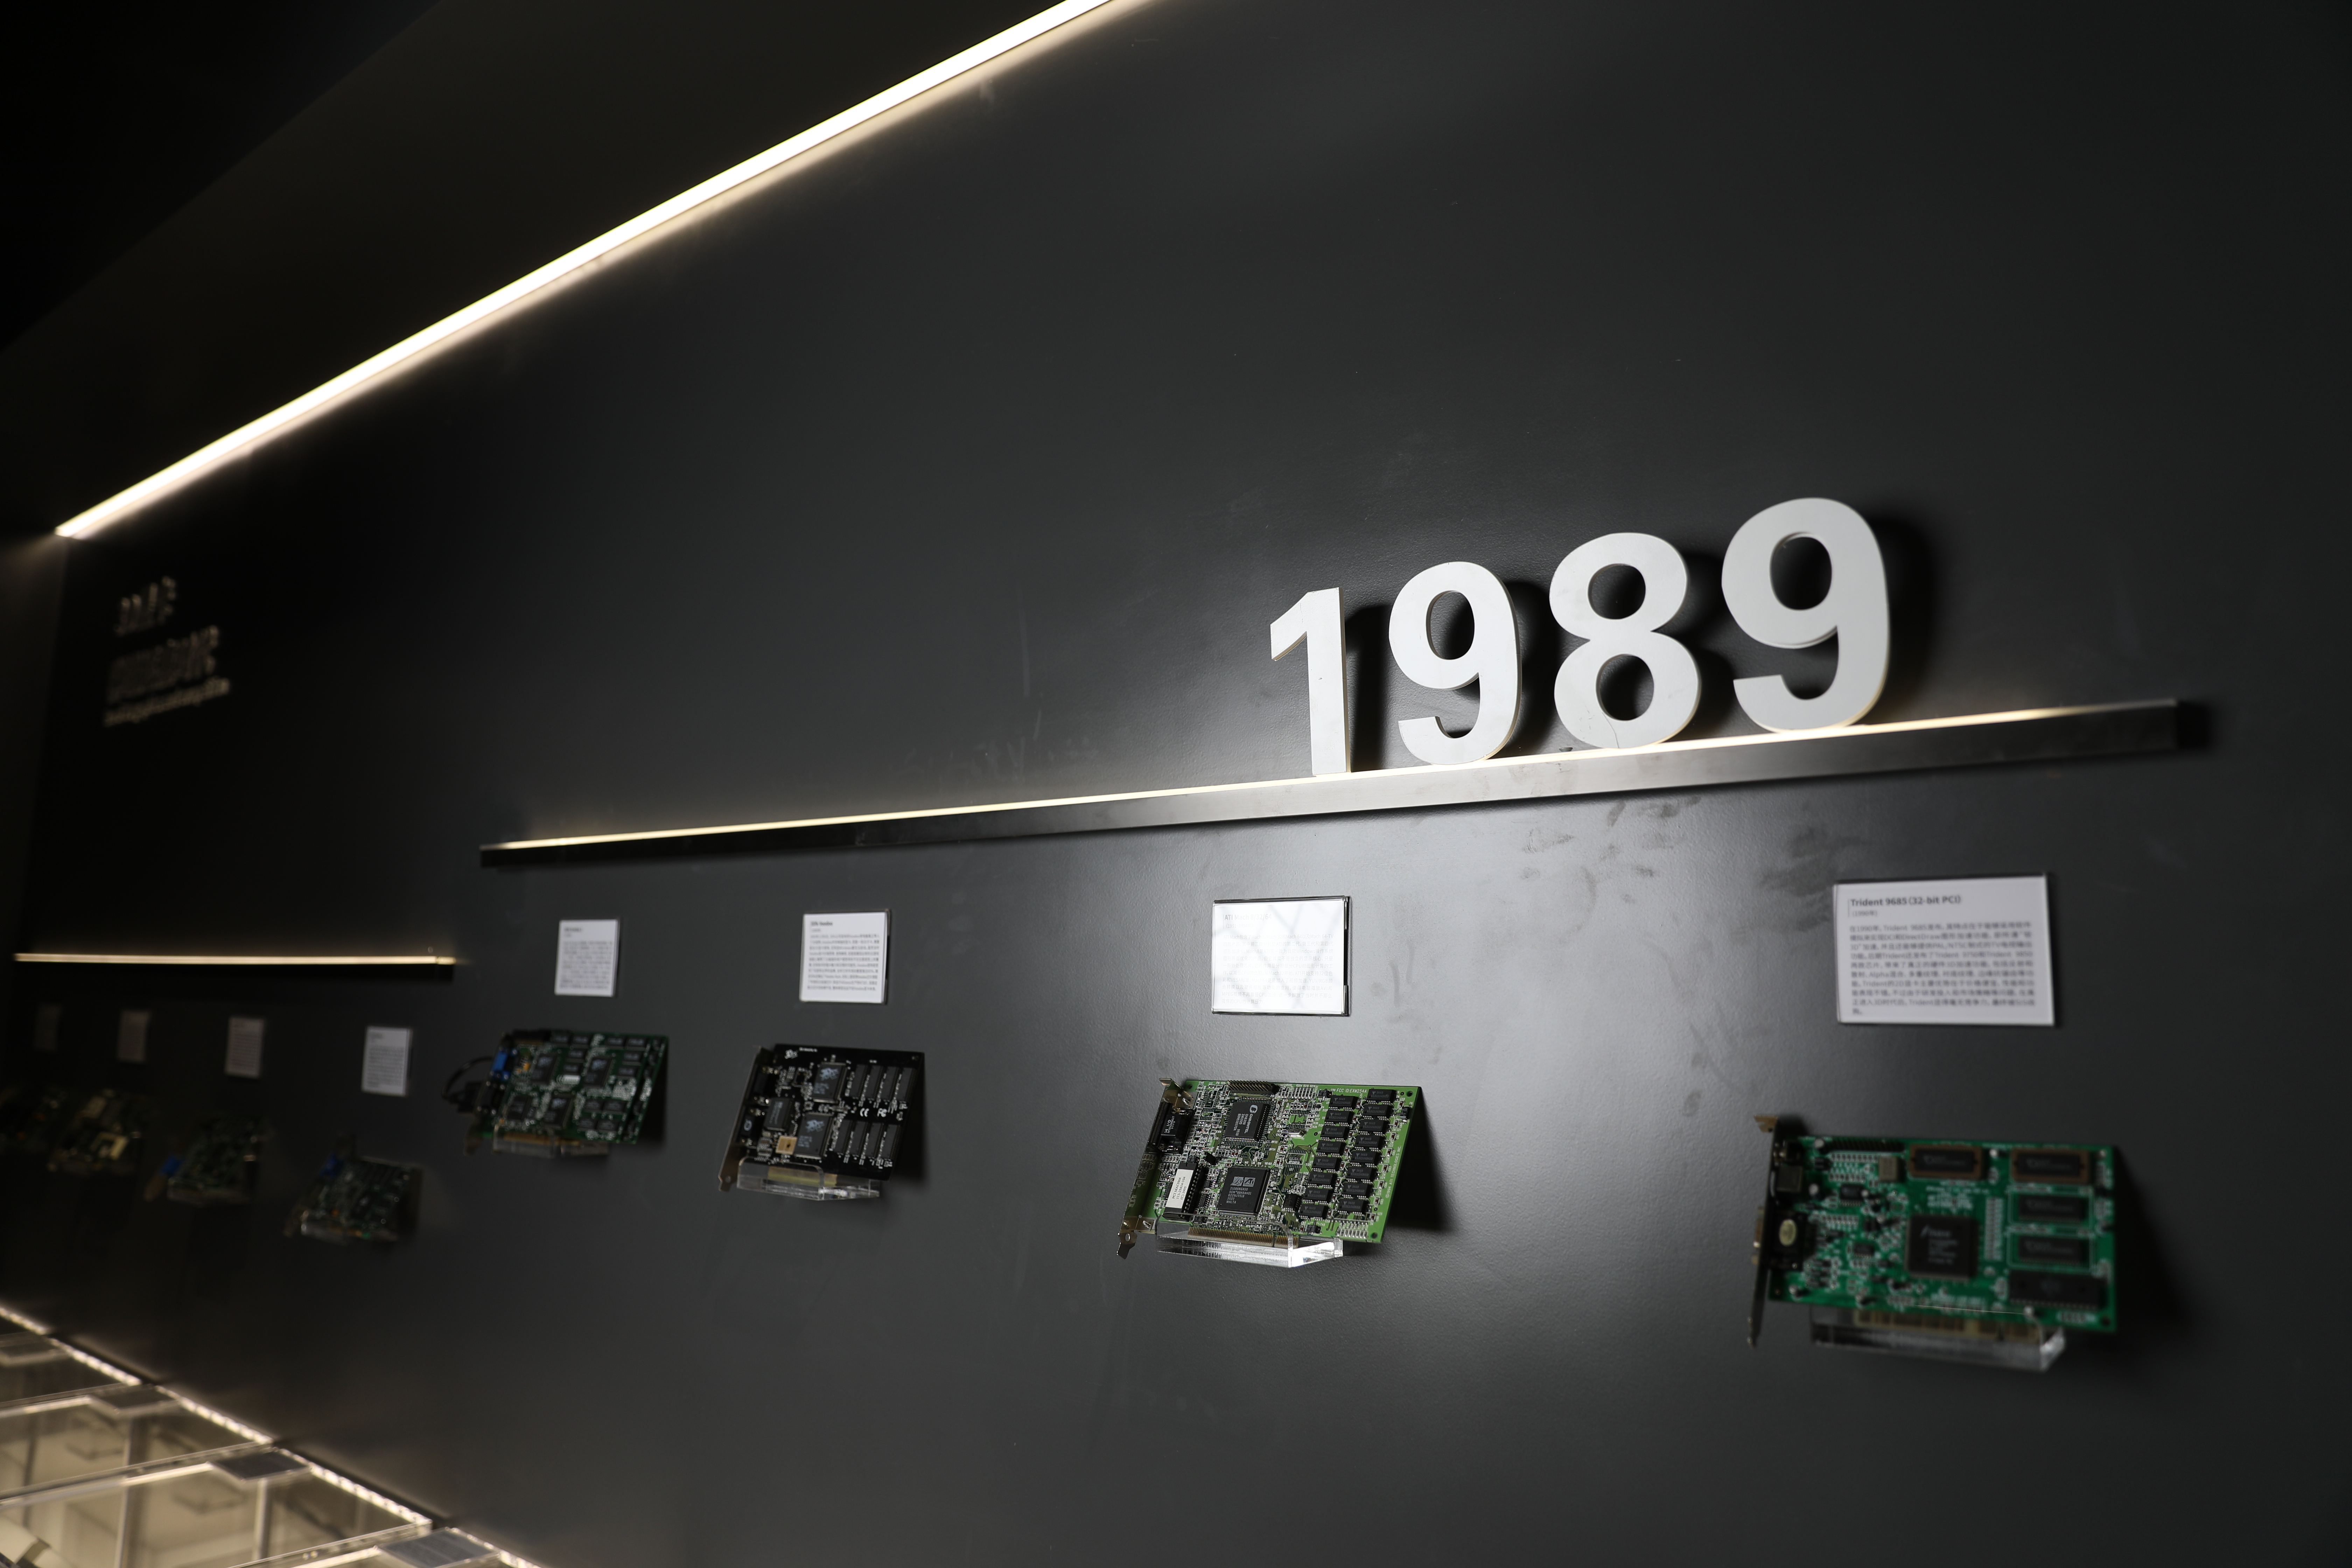 Colorful's GPU museum display with graphics cards from 2000 to 2021